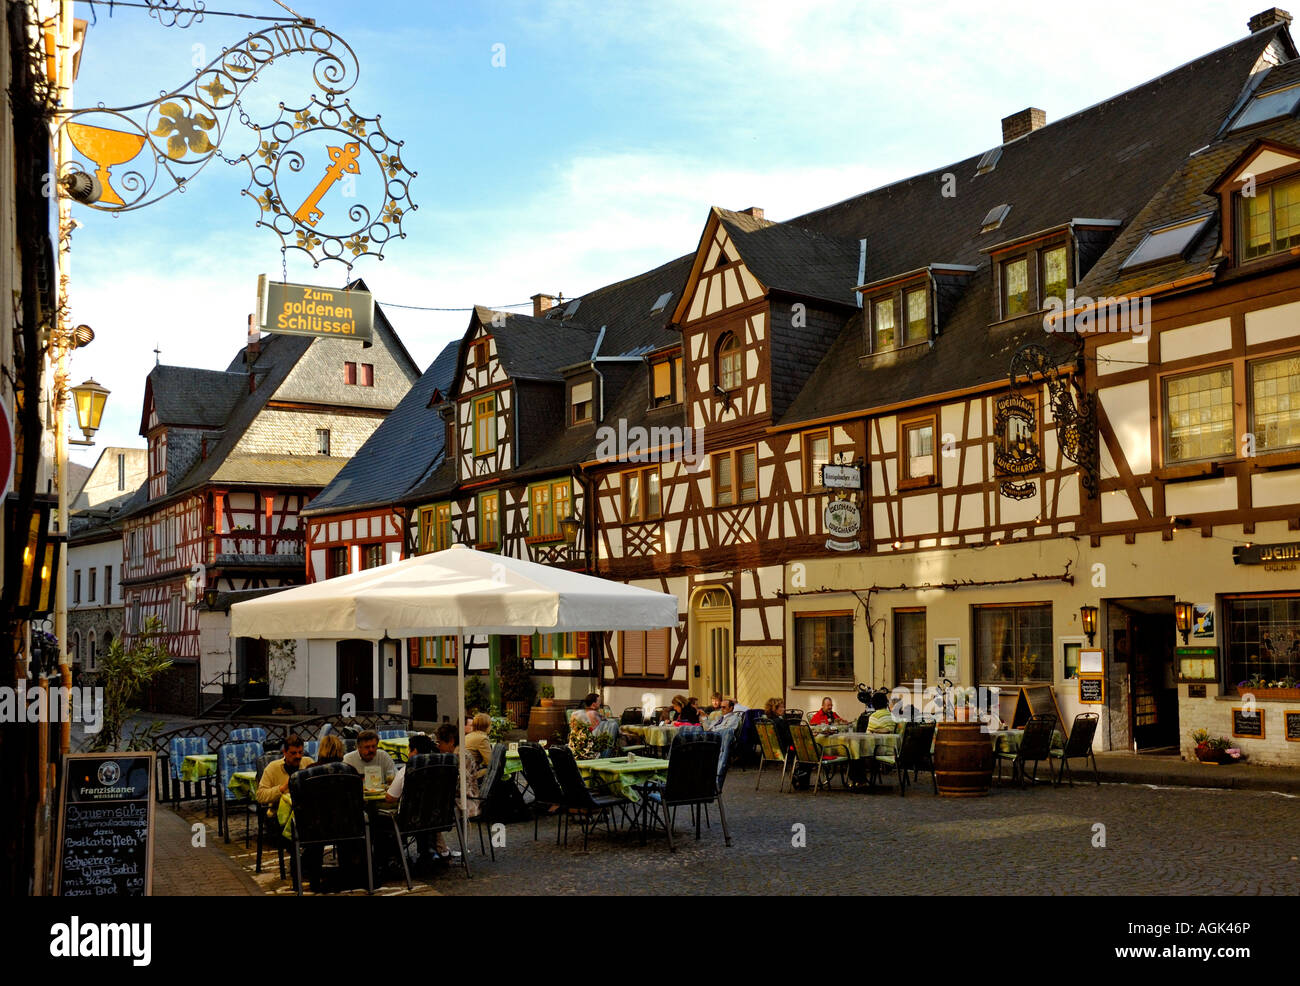 Guests eating & drinking outside 18th century Half-timbered buildings in Braubach, upper middle rhine valley, Germany, Stock Photo